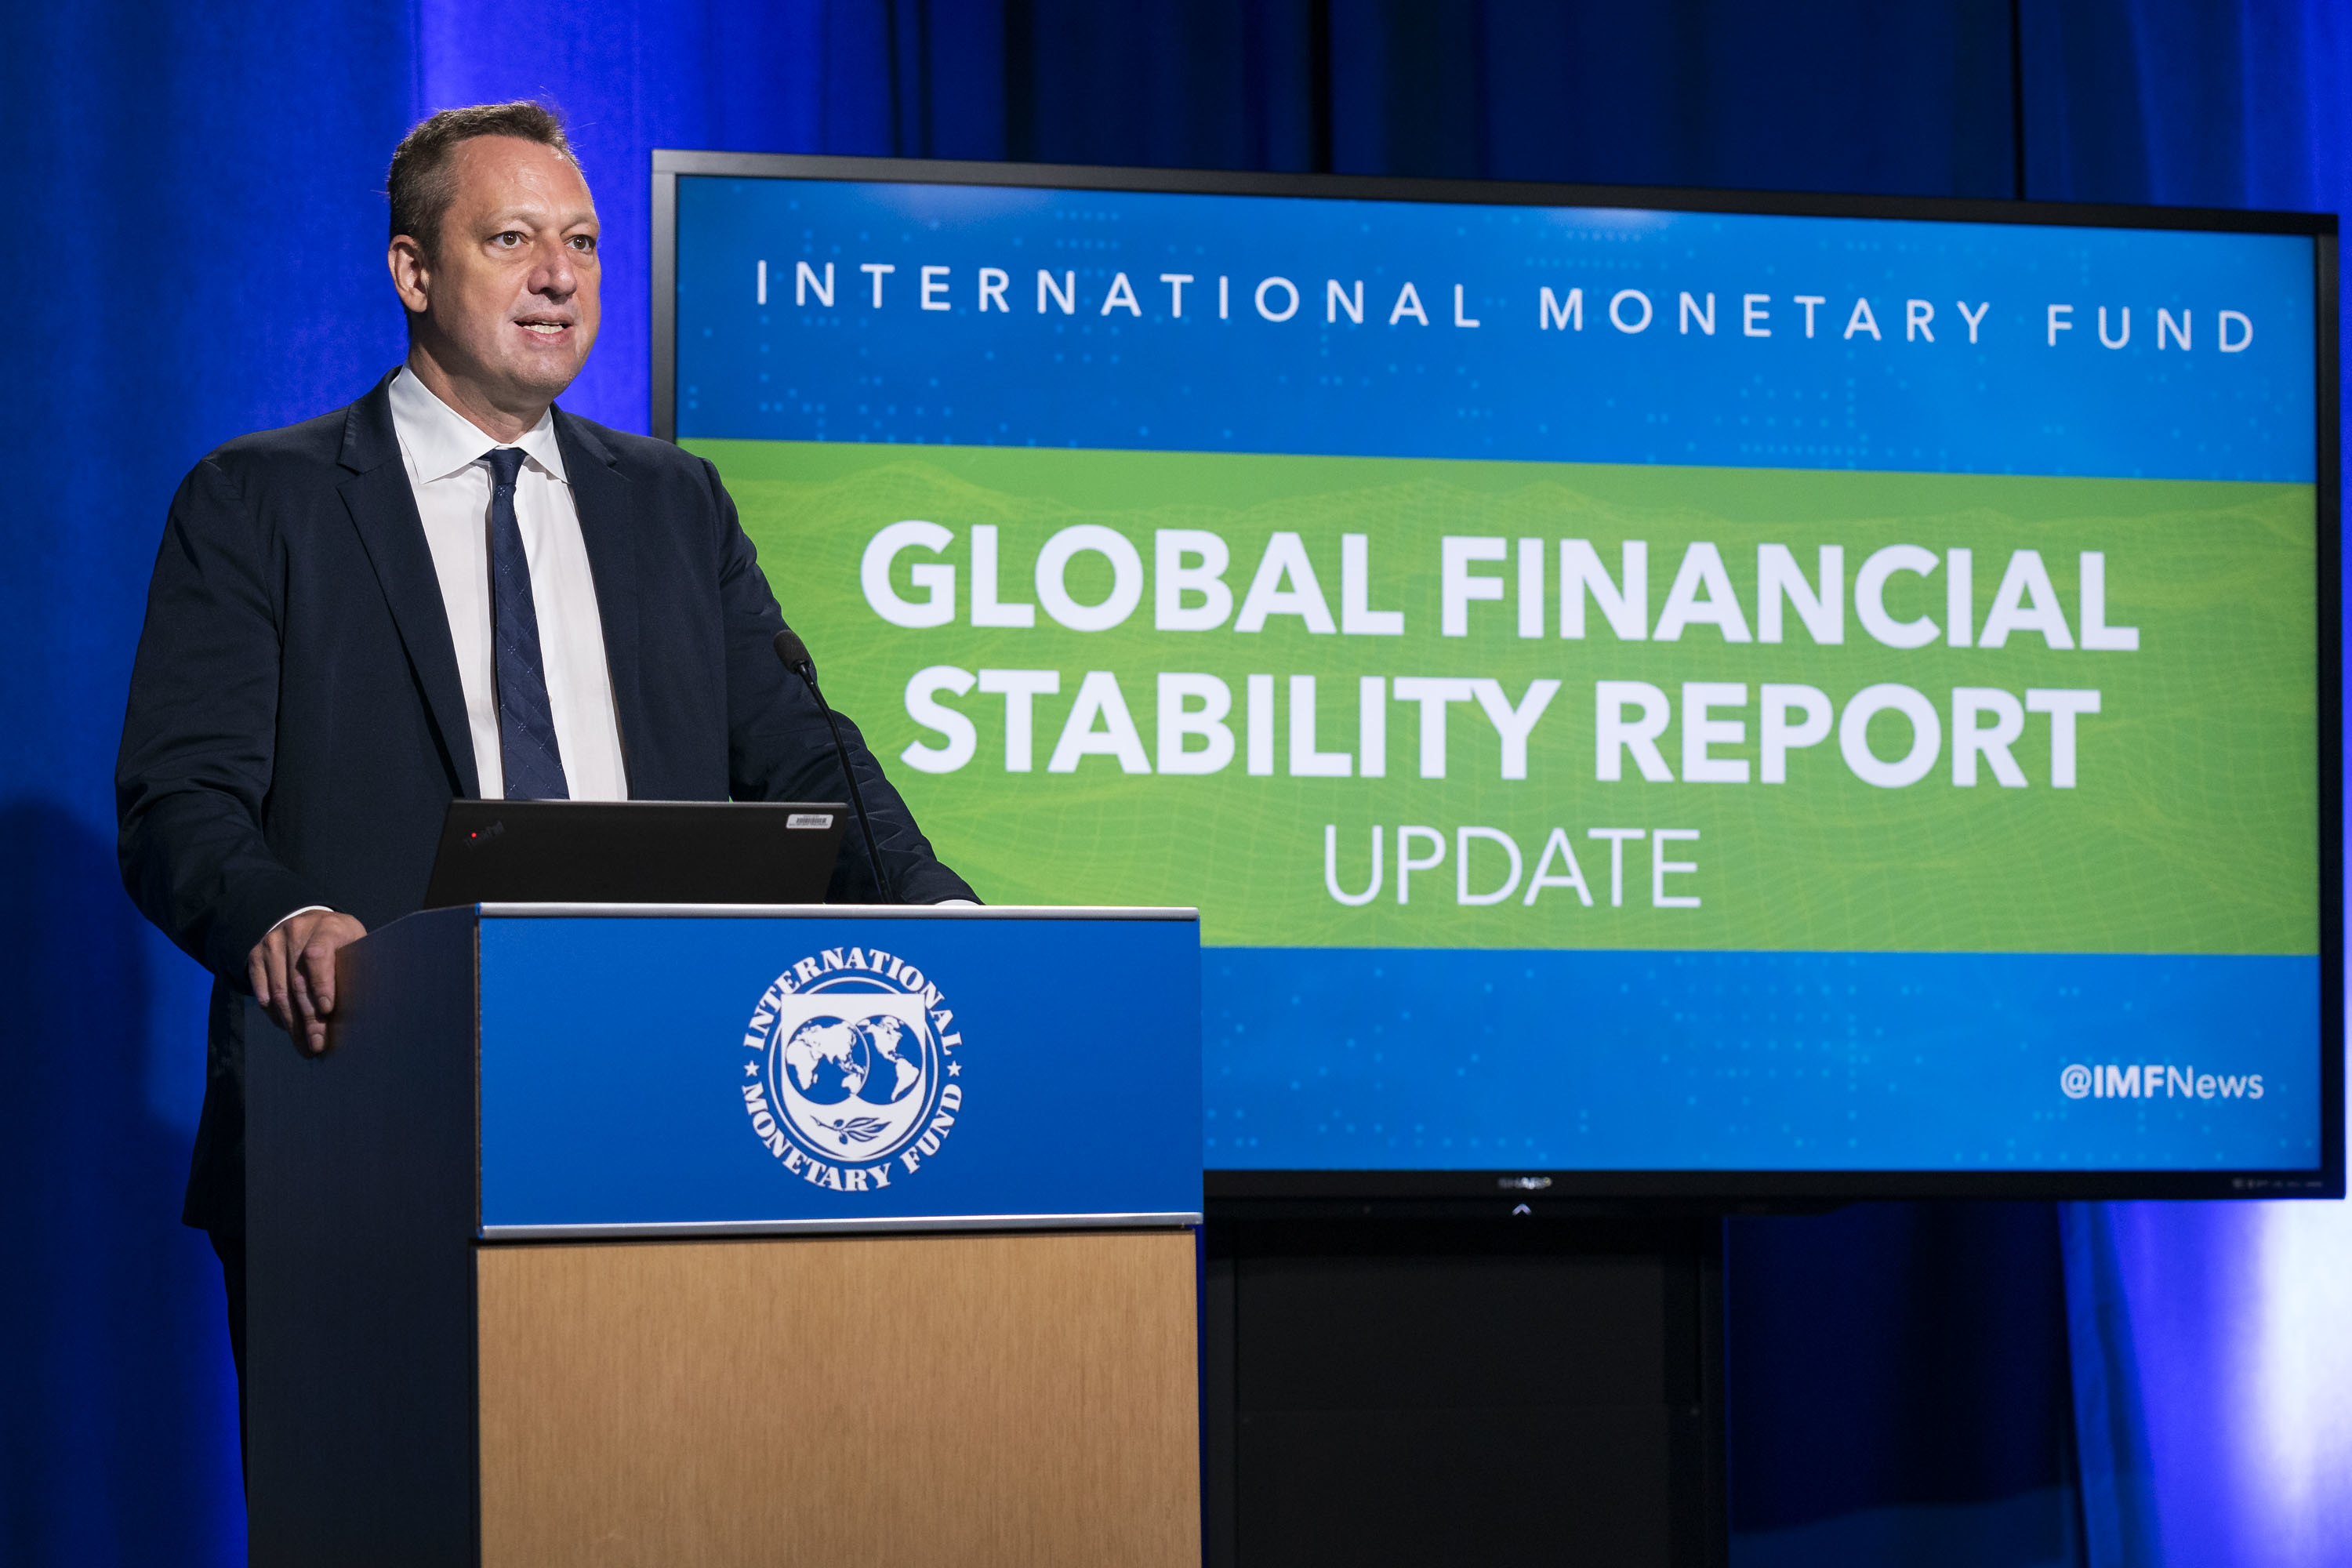 Update to Global Financial Stability